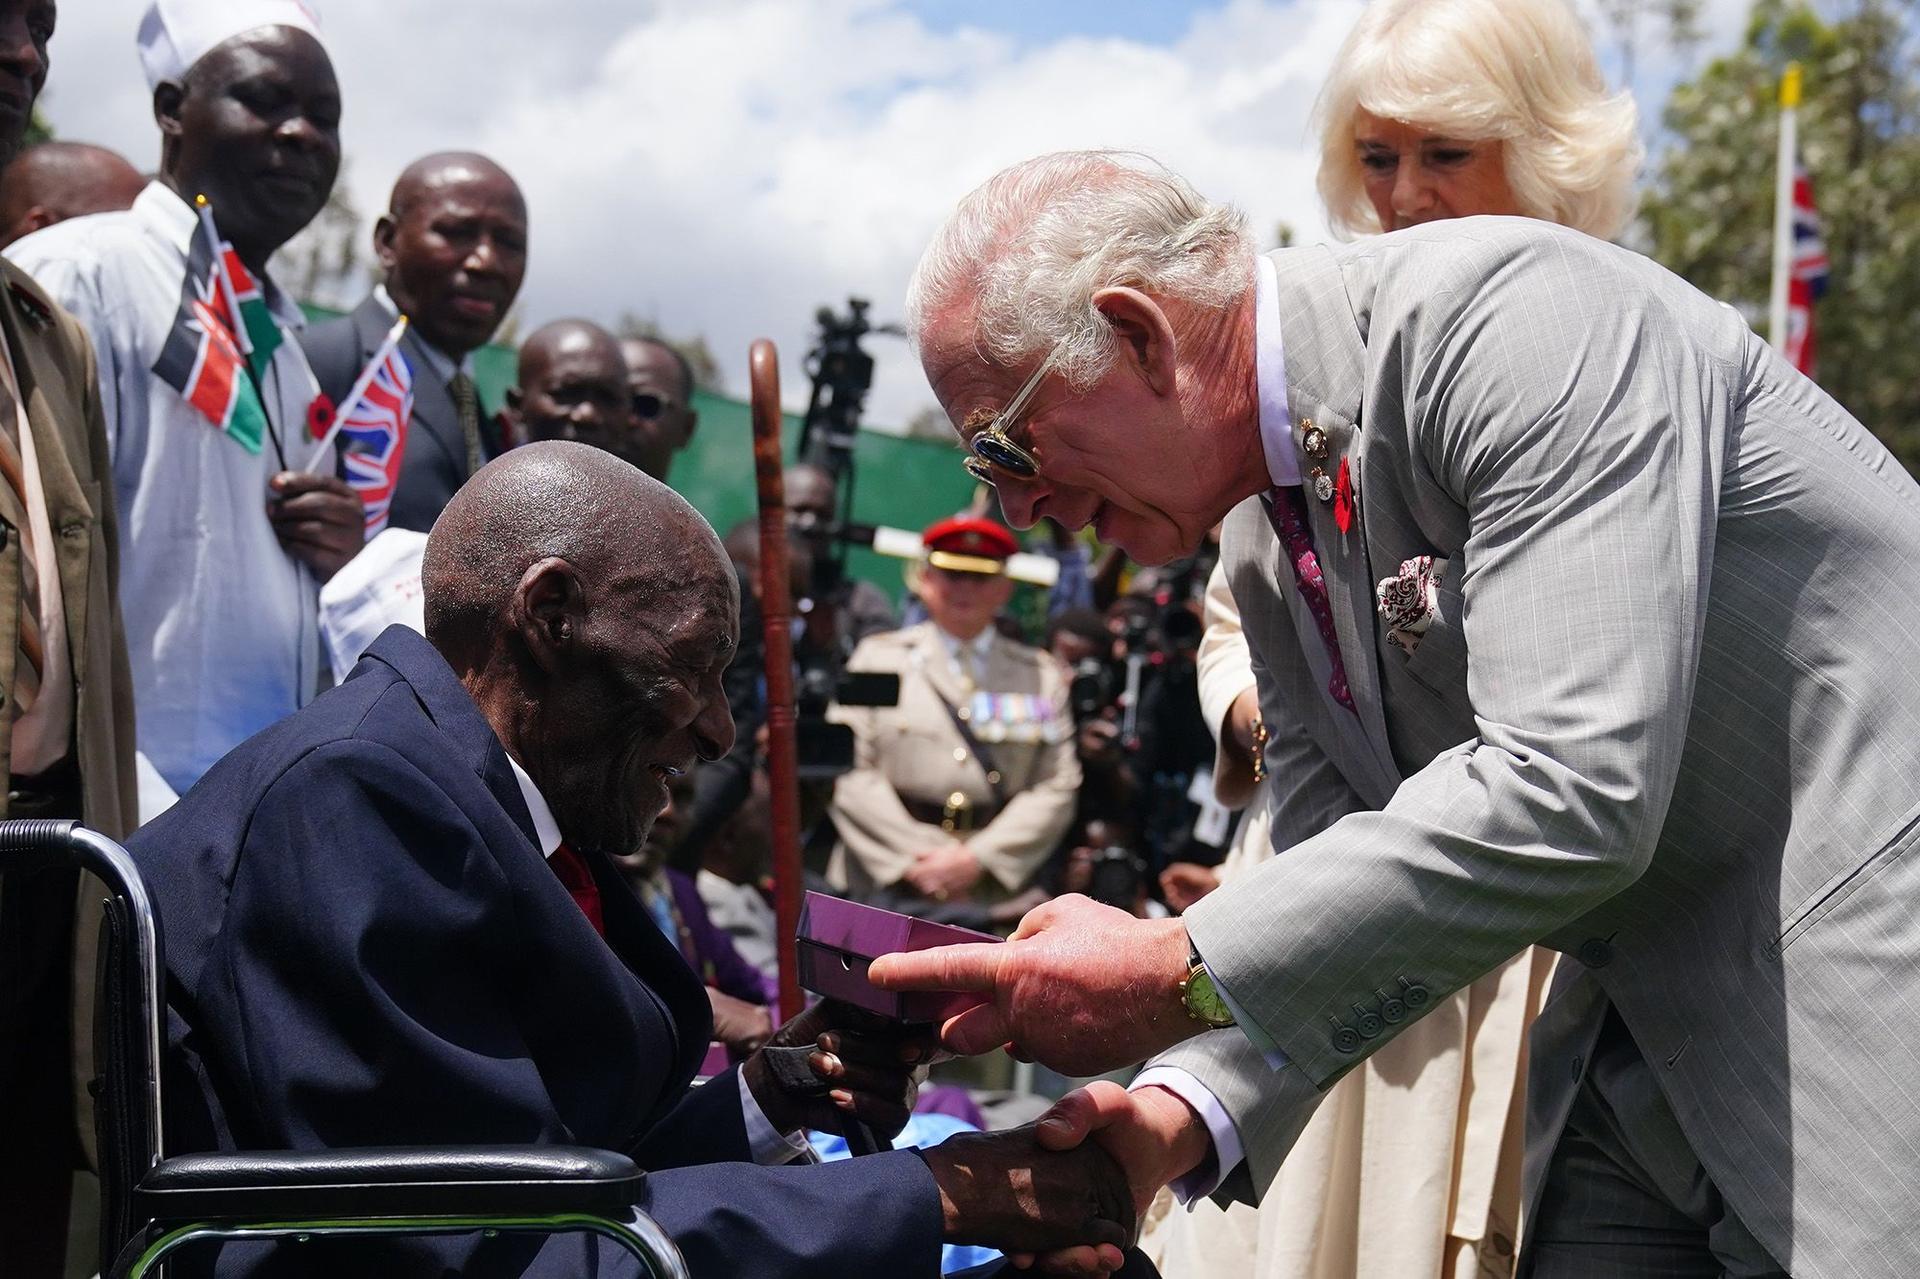 King Charles III and Queen Camilla meet veteran Samwel Nthigai Mburia, who is believed to be 117 years old, in Nairobi.